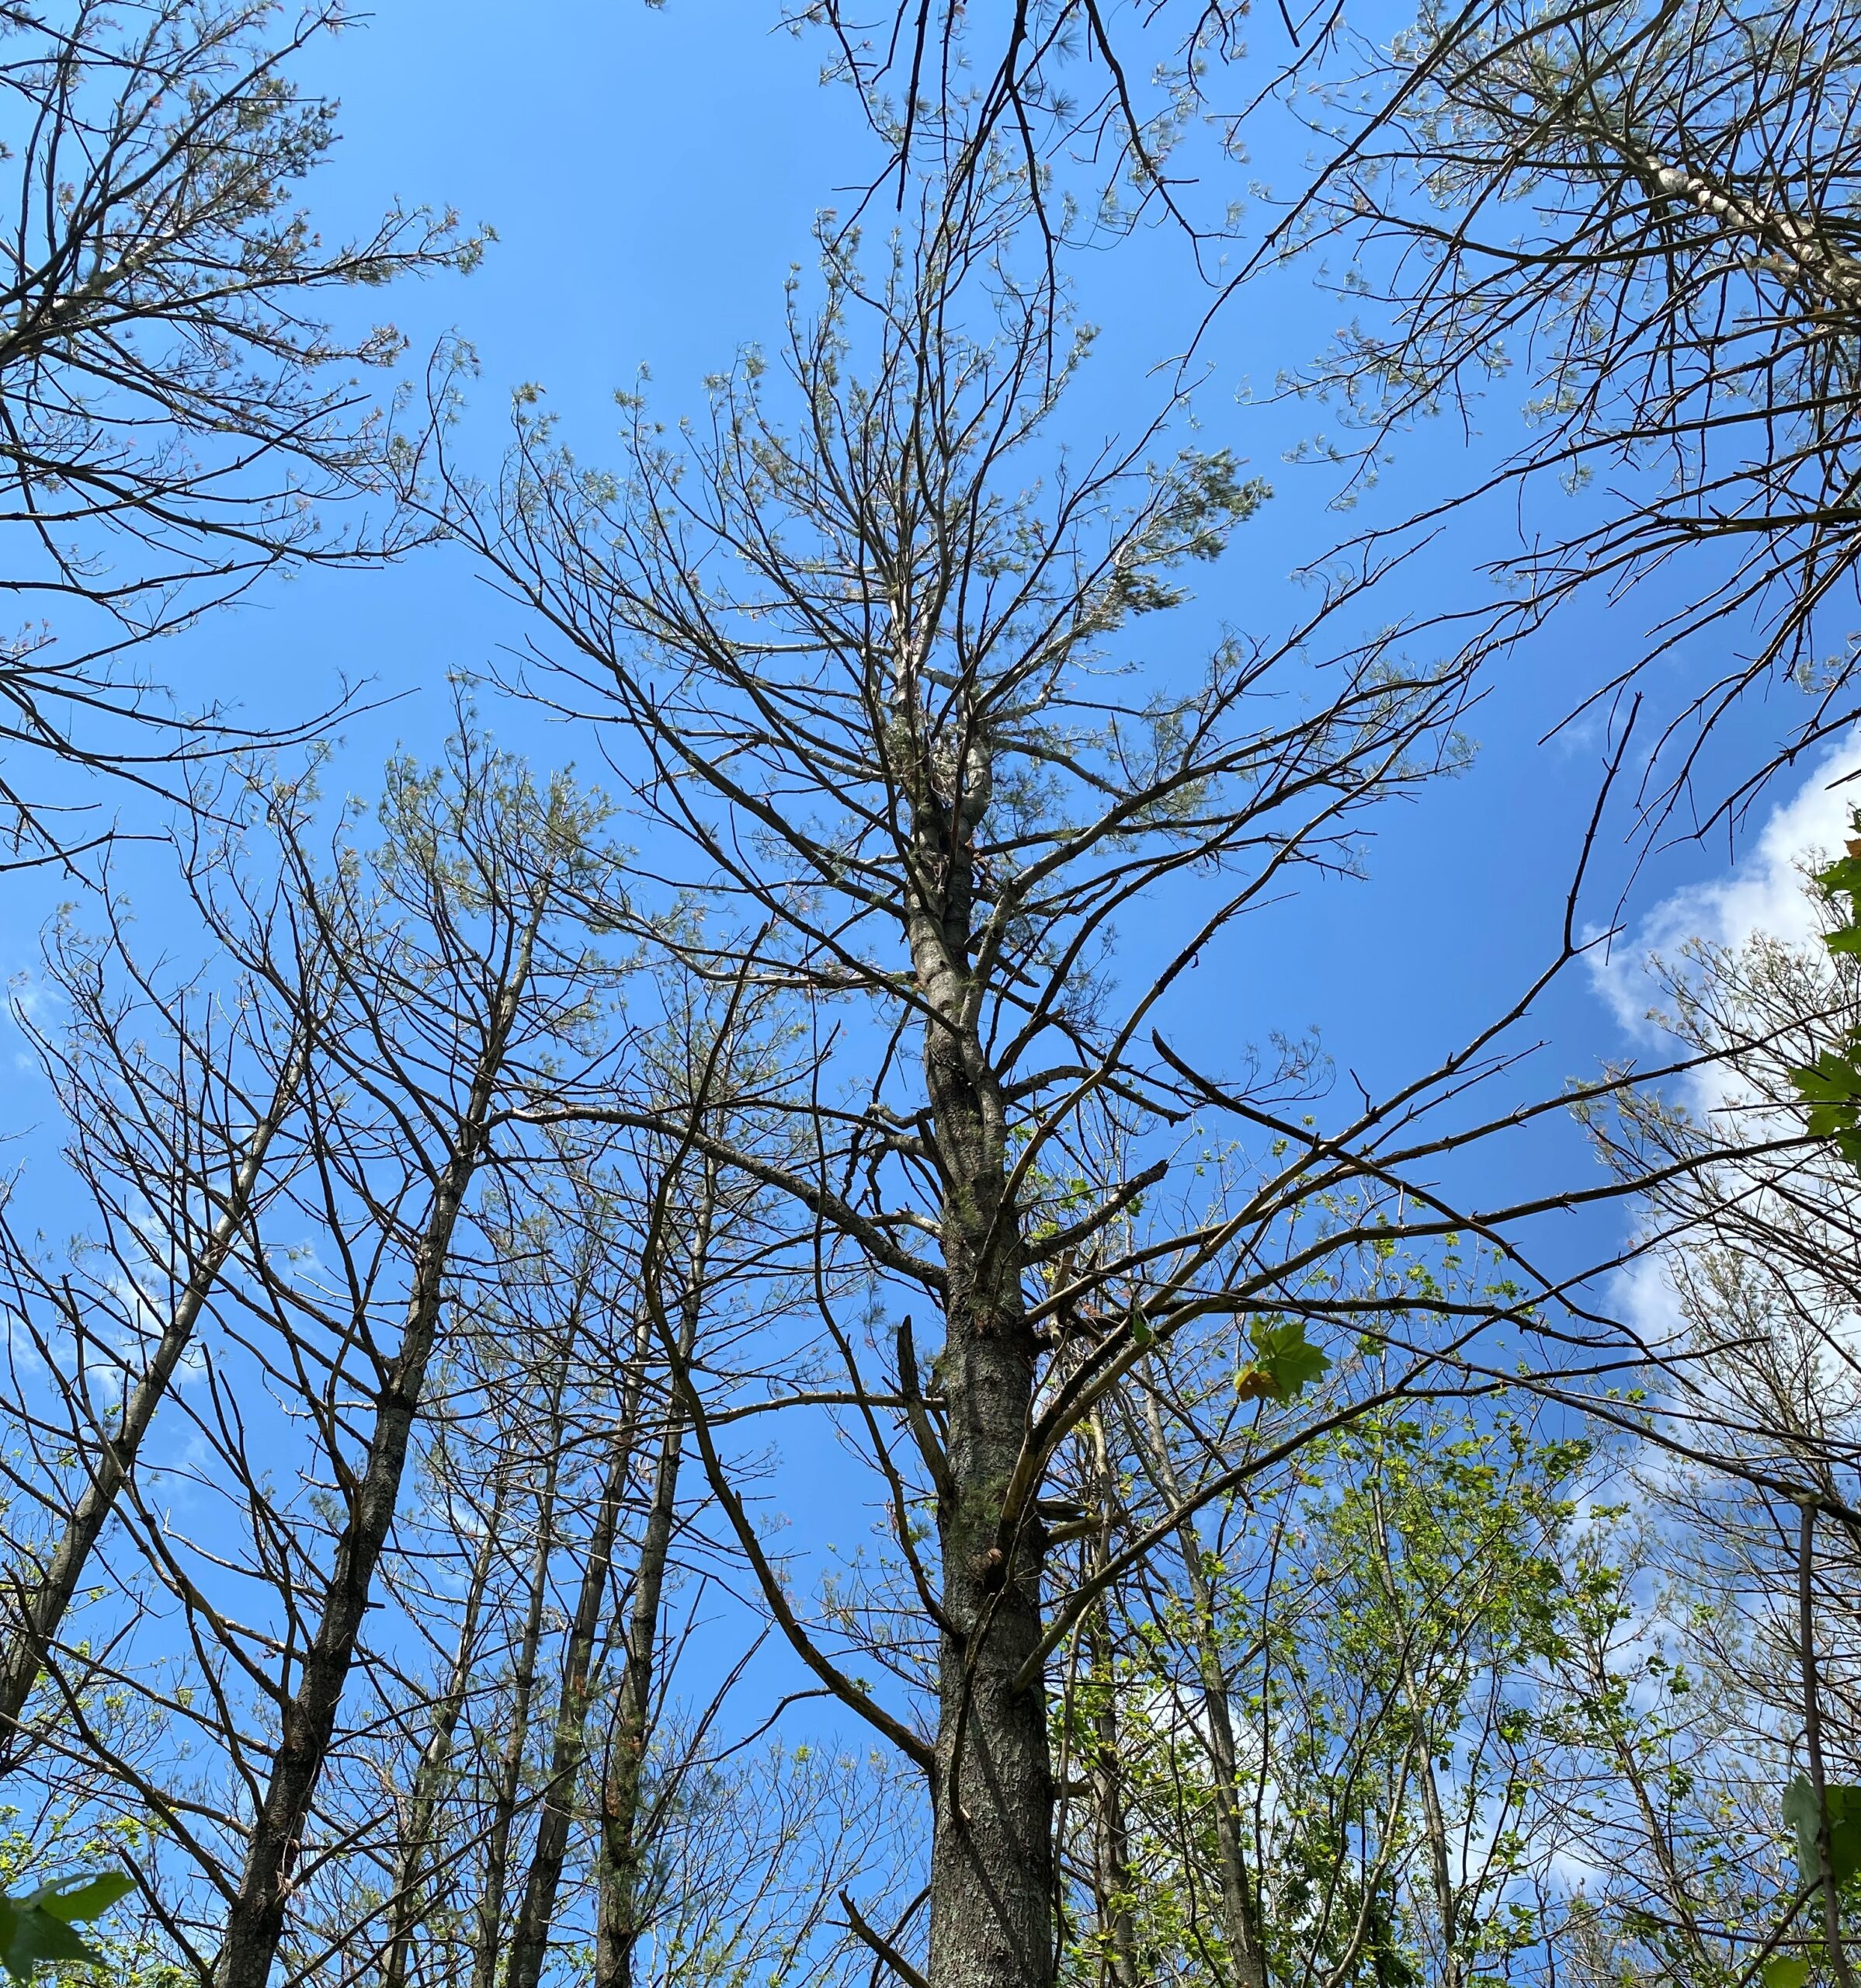 White pine canopy with severe needle loss and branch damage.